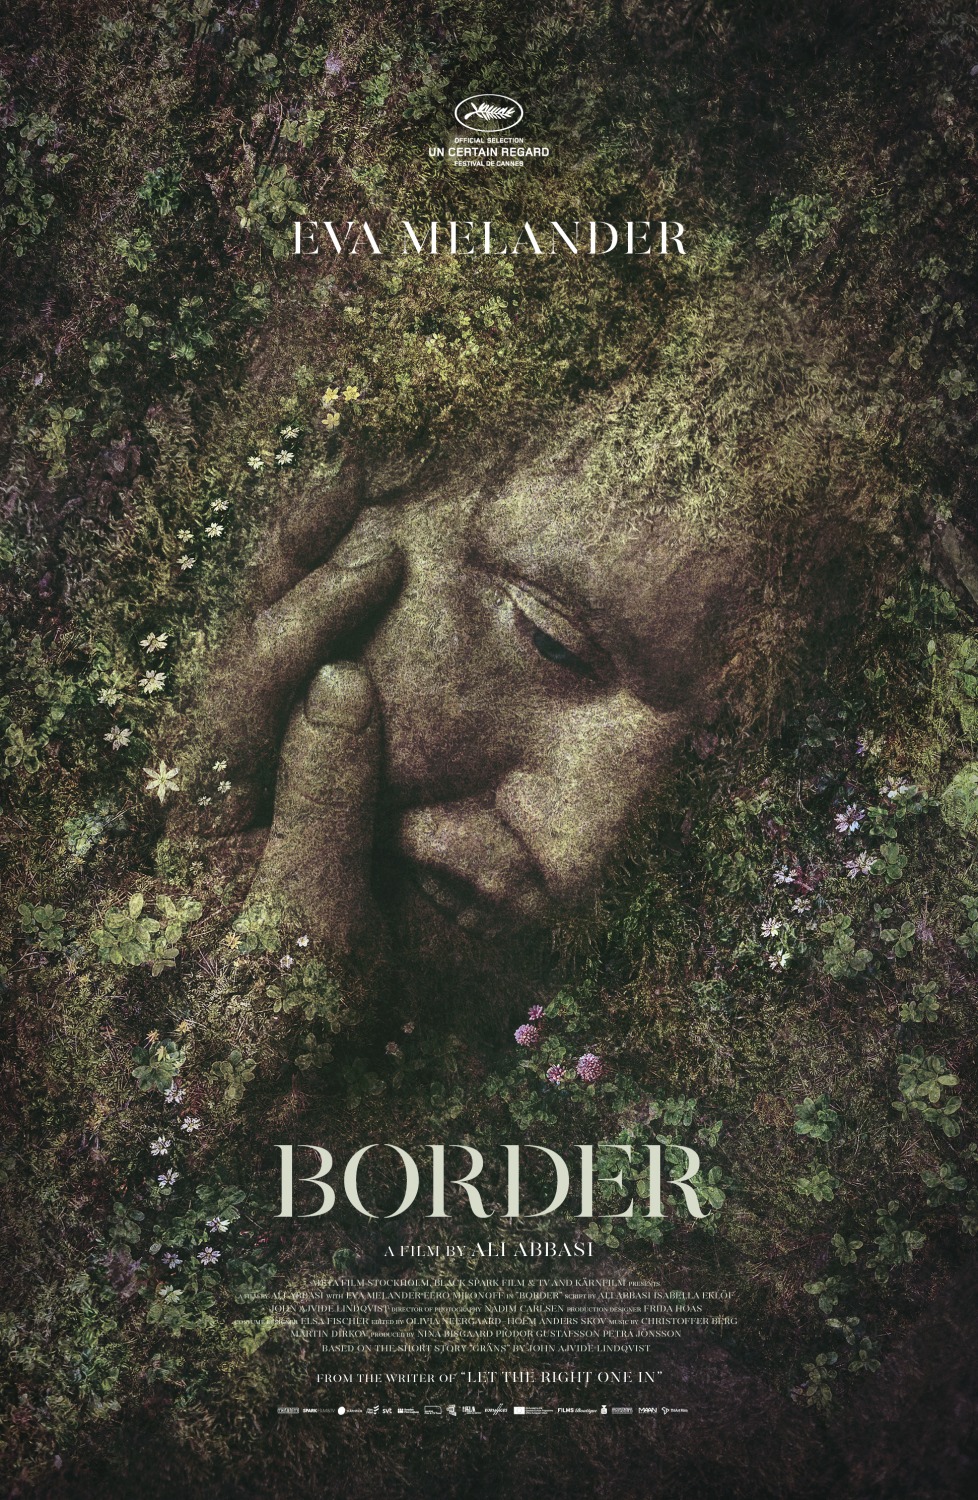 Grӓns (Border) film review Cannes 2018: John Ajvide Lindqvist adaptation is beautifully twisted